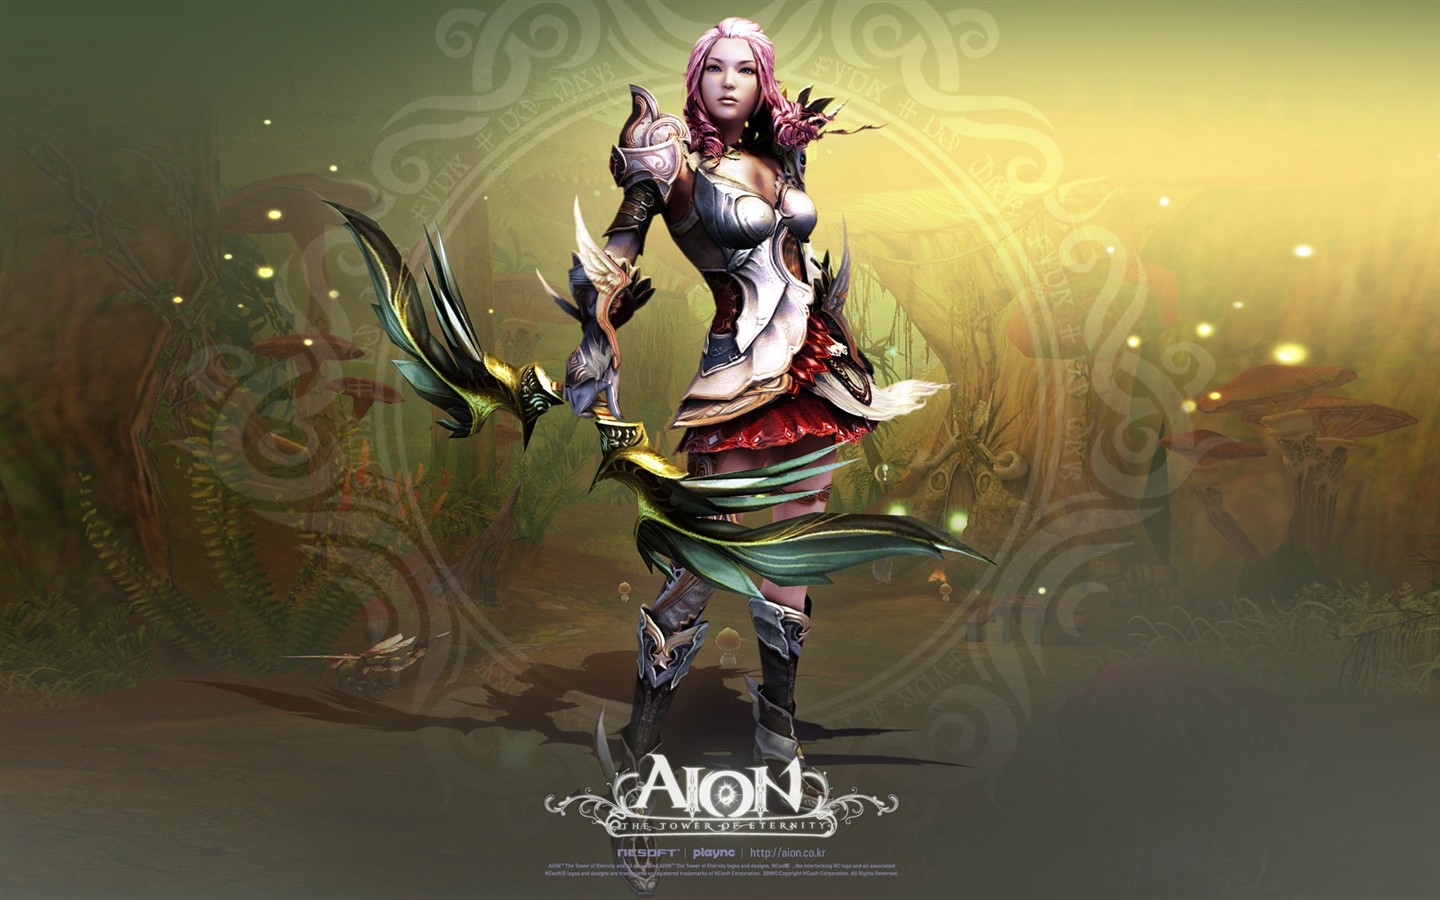 Aion modeling HD gaming wallpapers #9 - 1440x900